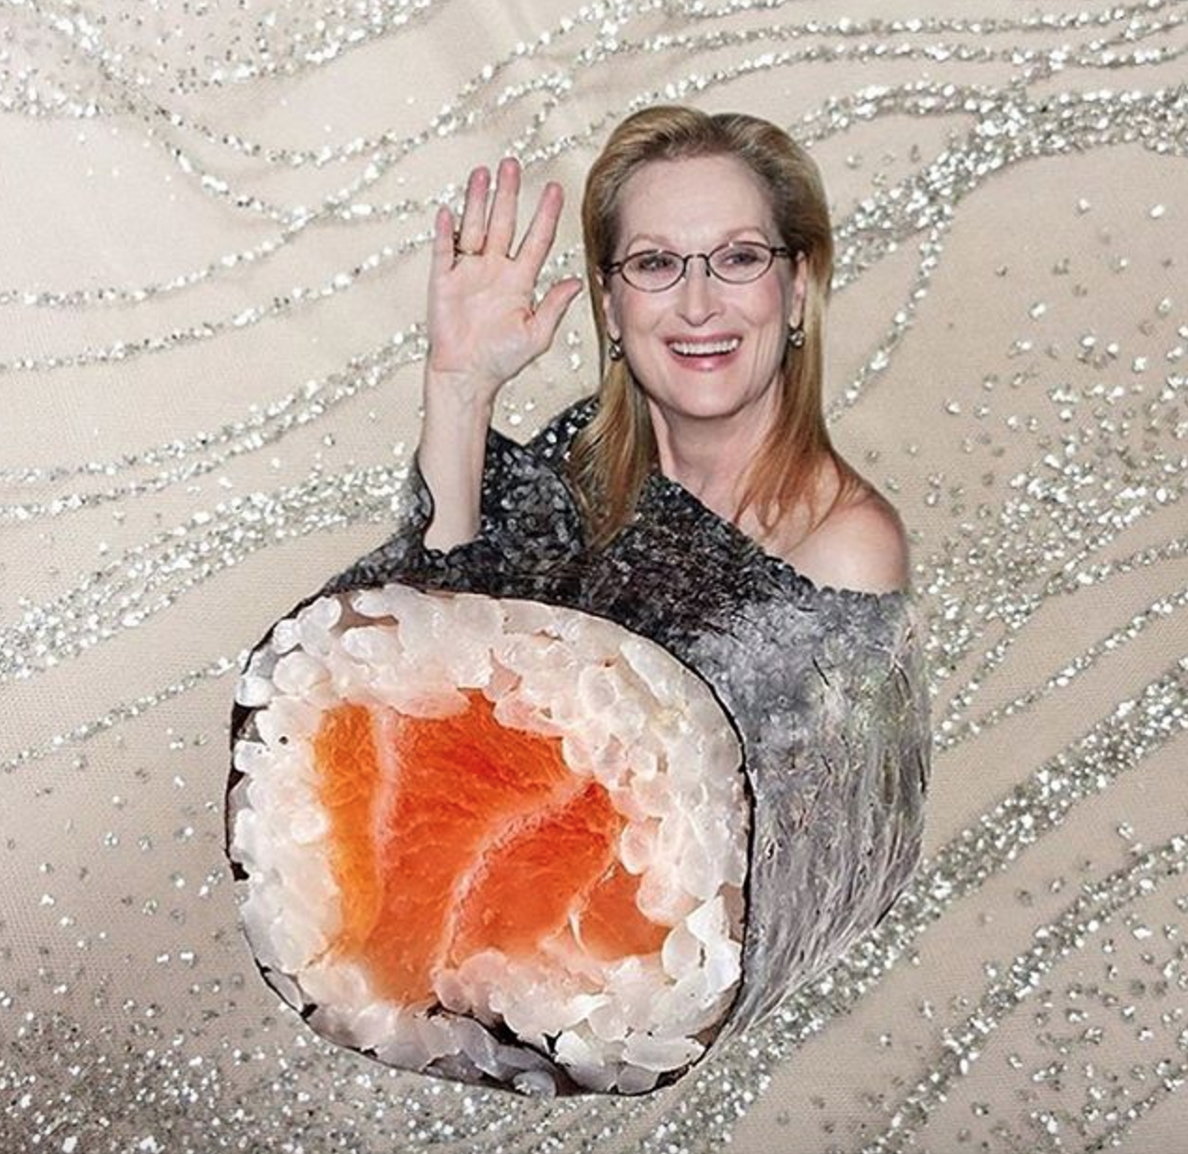 This is Meryl Streep’s Best (Sushi) Role Yet